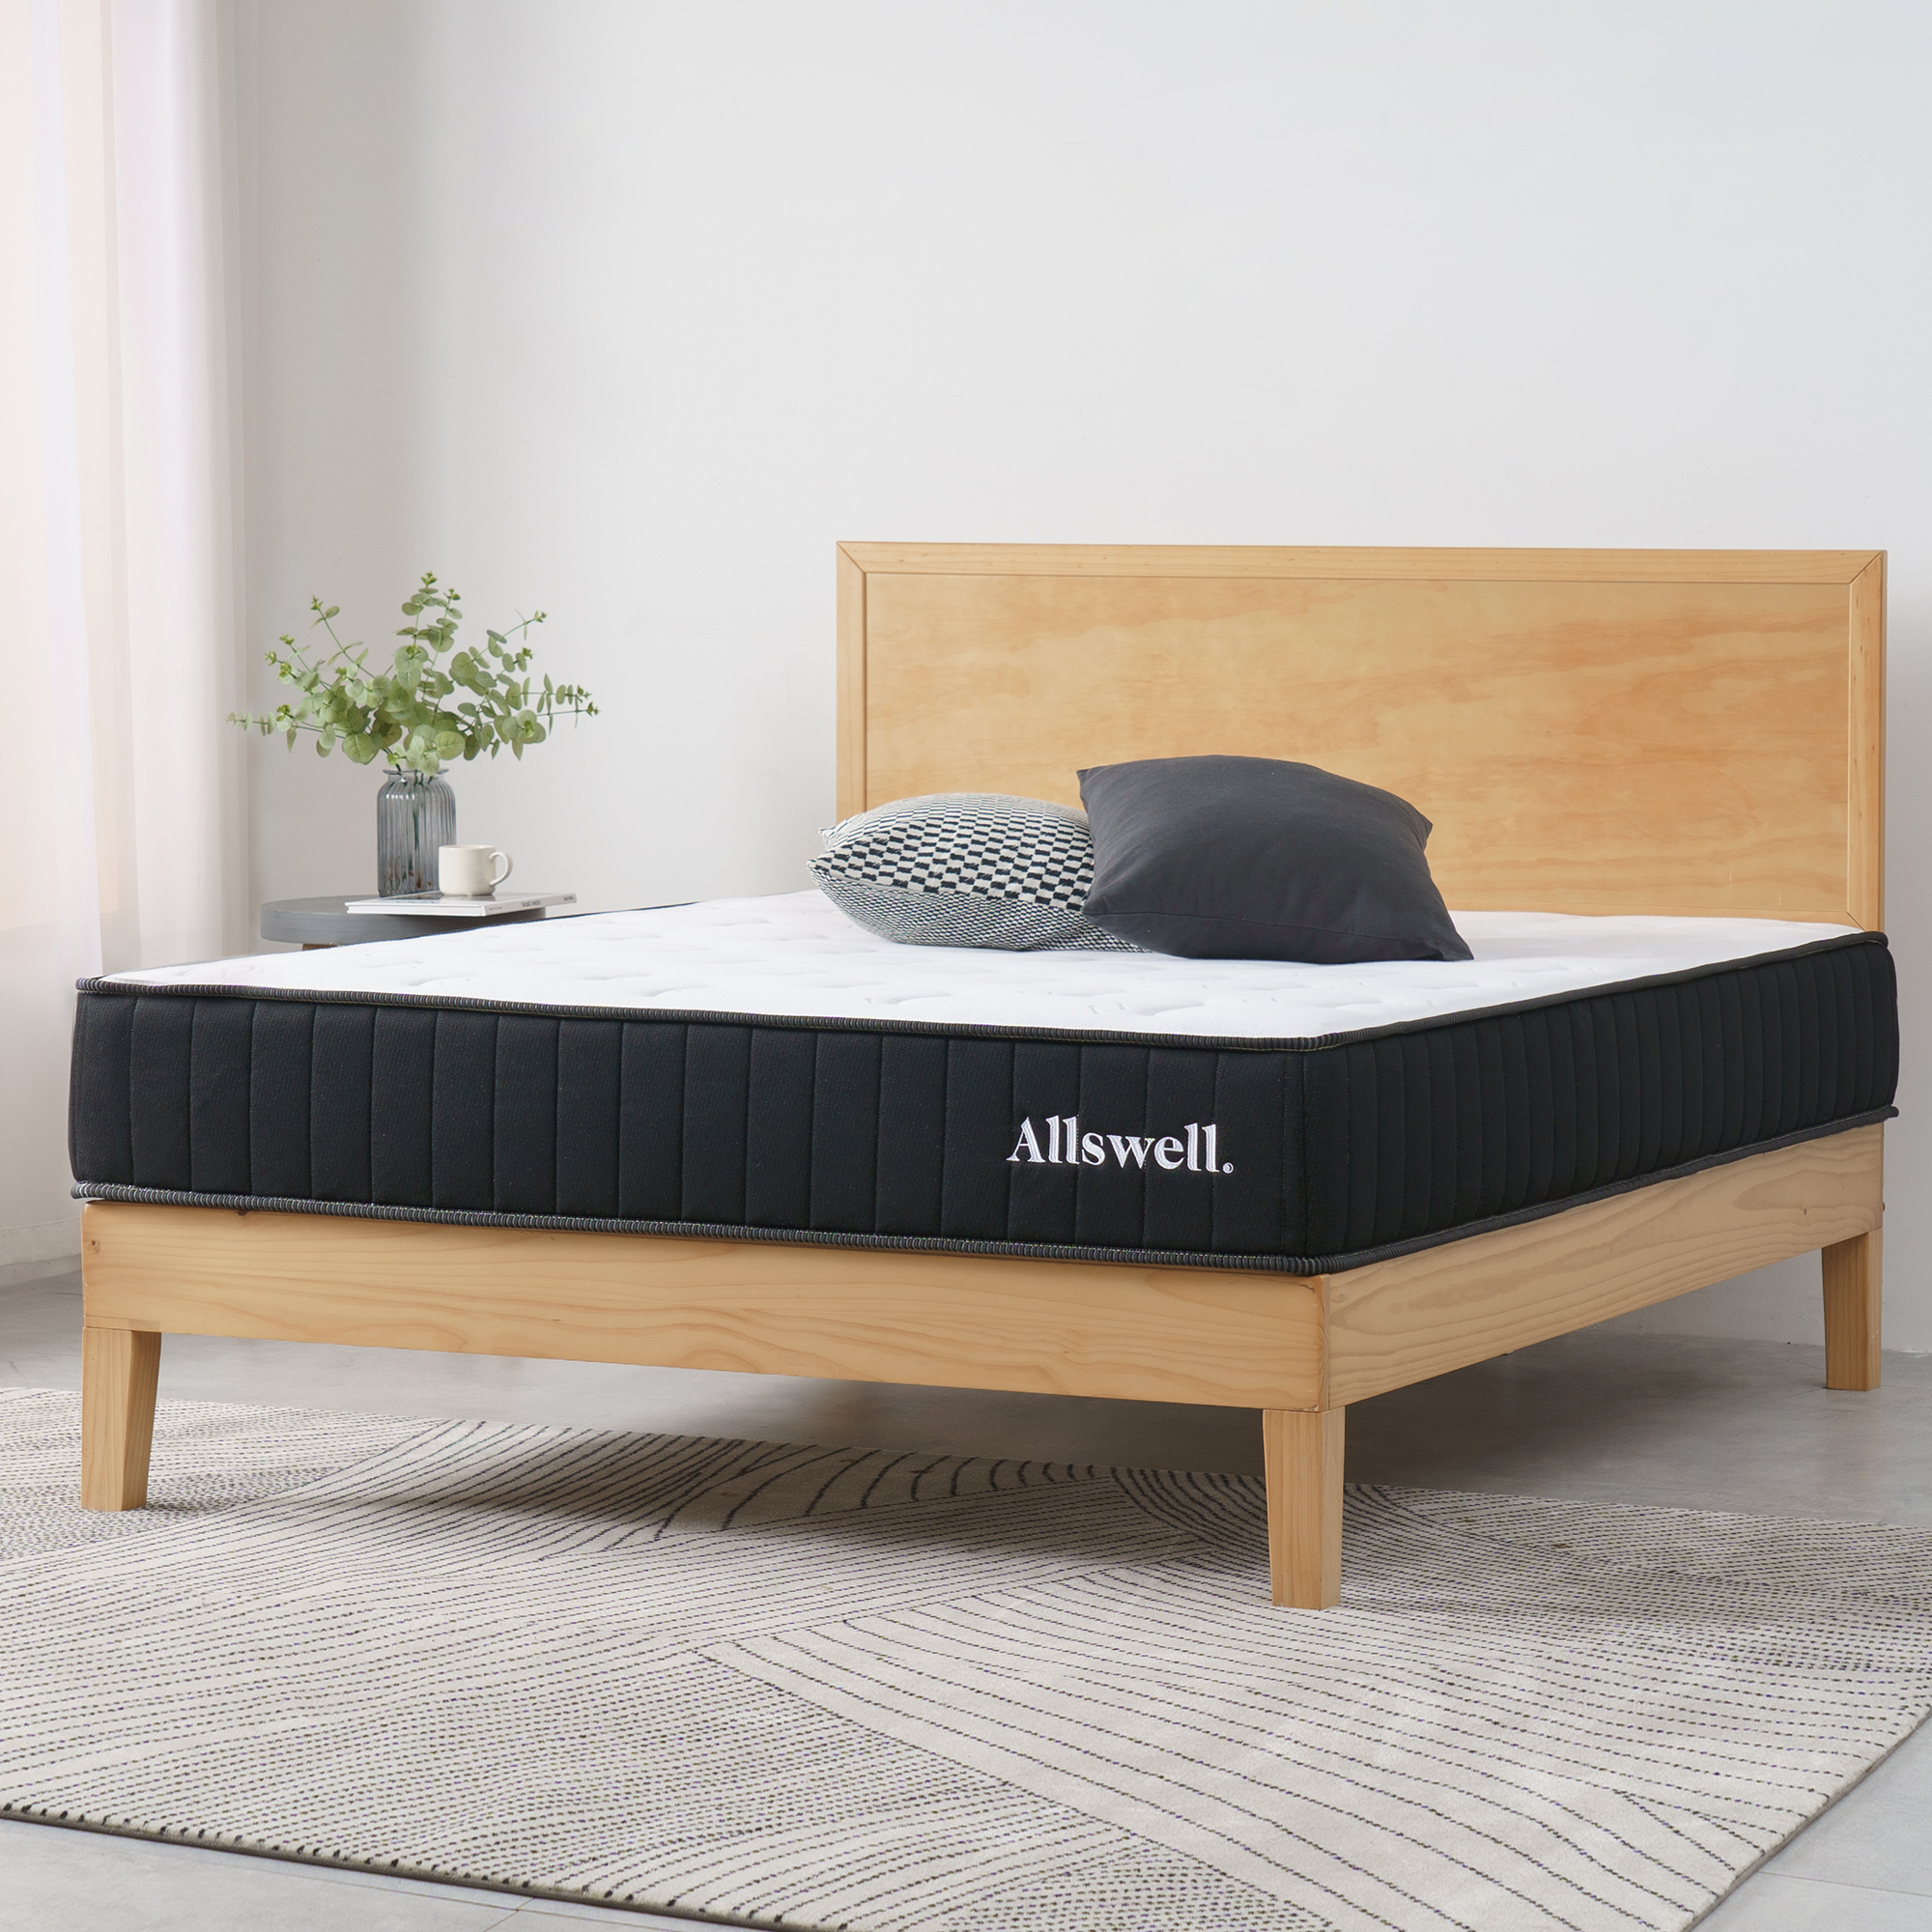 The Allswell 10" Hybrid Mattress in a Box with Gel Memory Foam, Adult, Queen - image 1 of 13